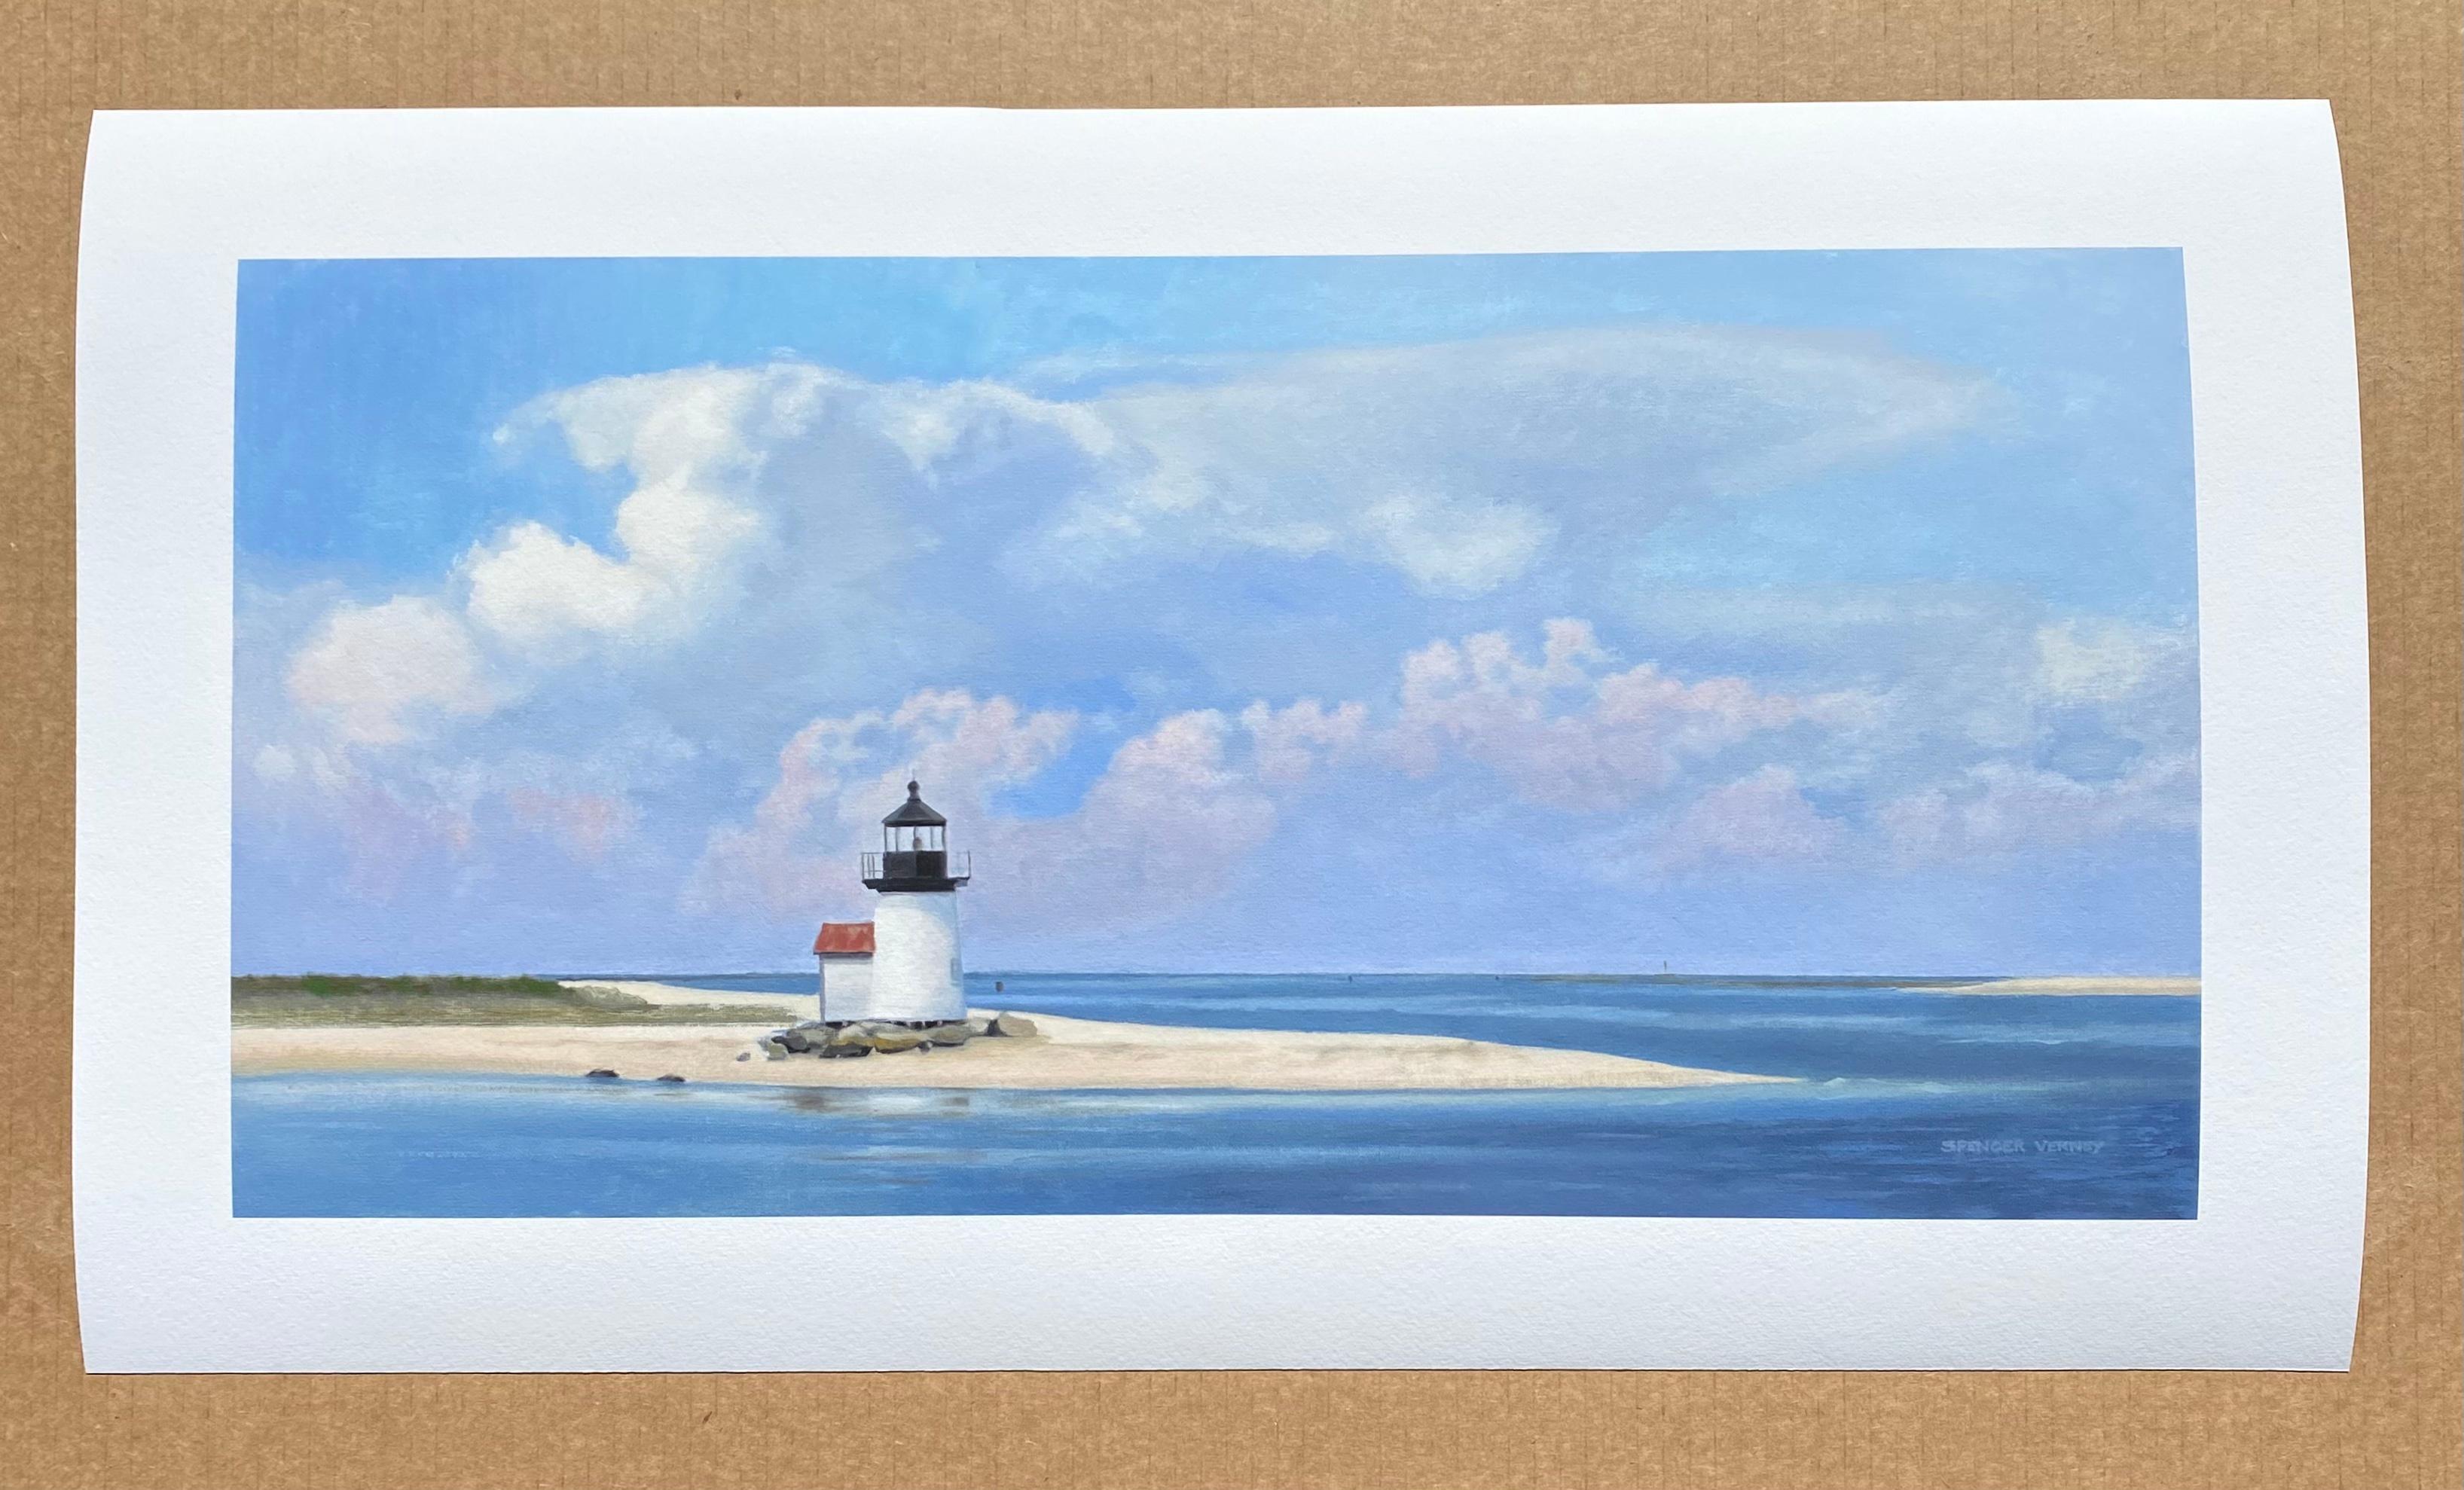 Nantucket, Brant Point Lighthouse (Limited edition giclée print) - Print by Spencer Verney